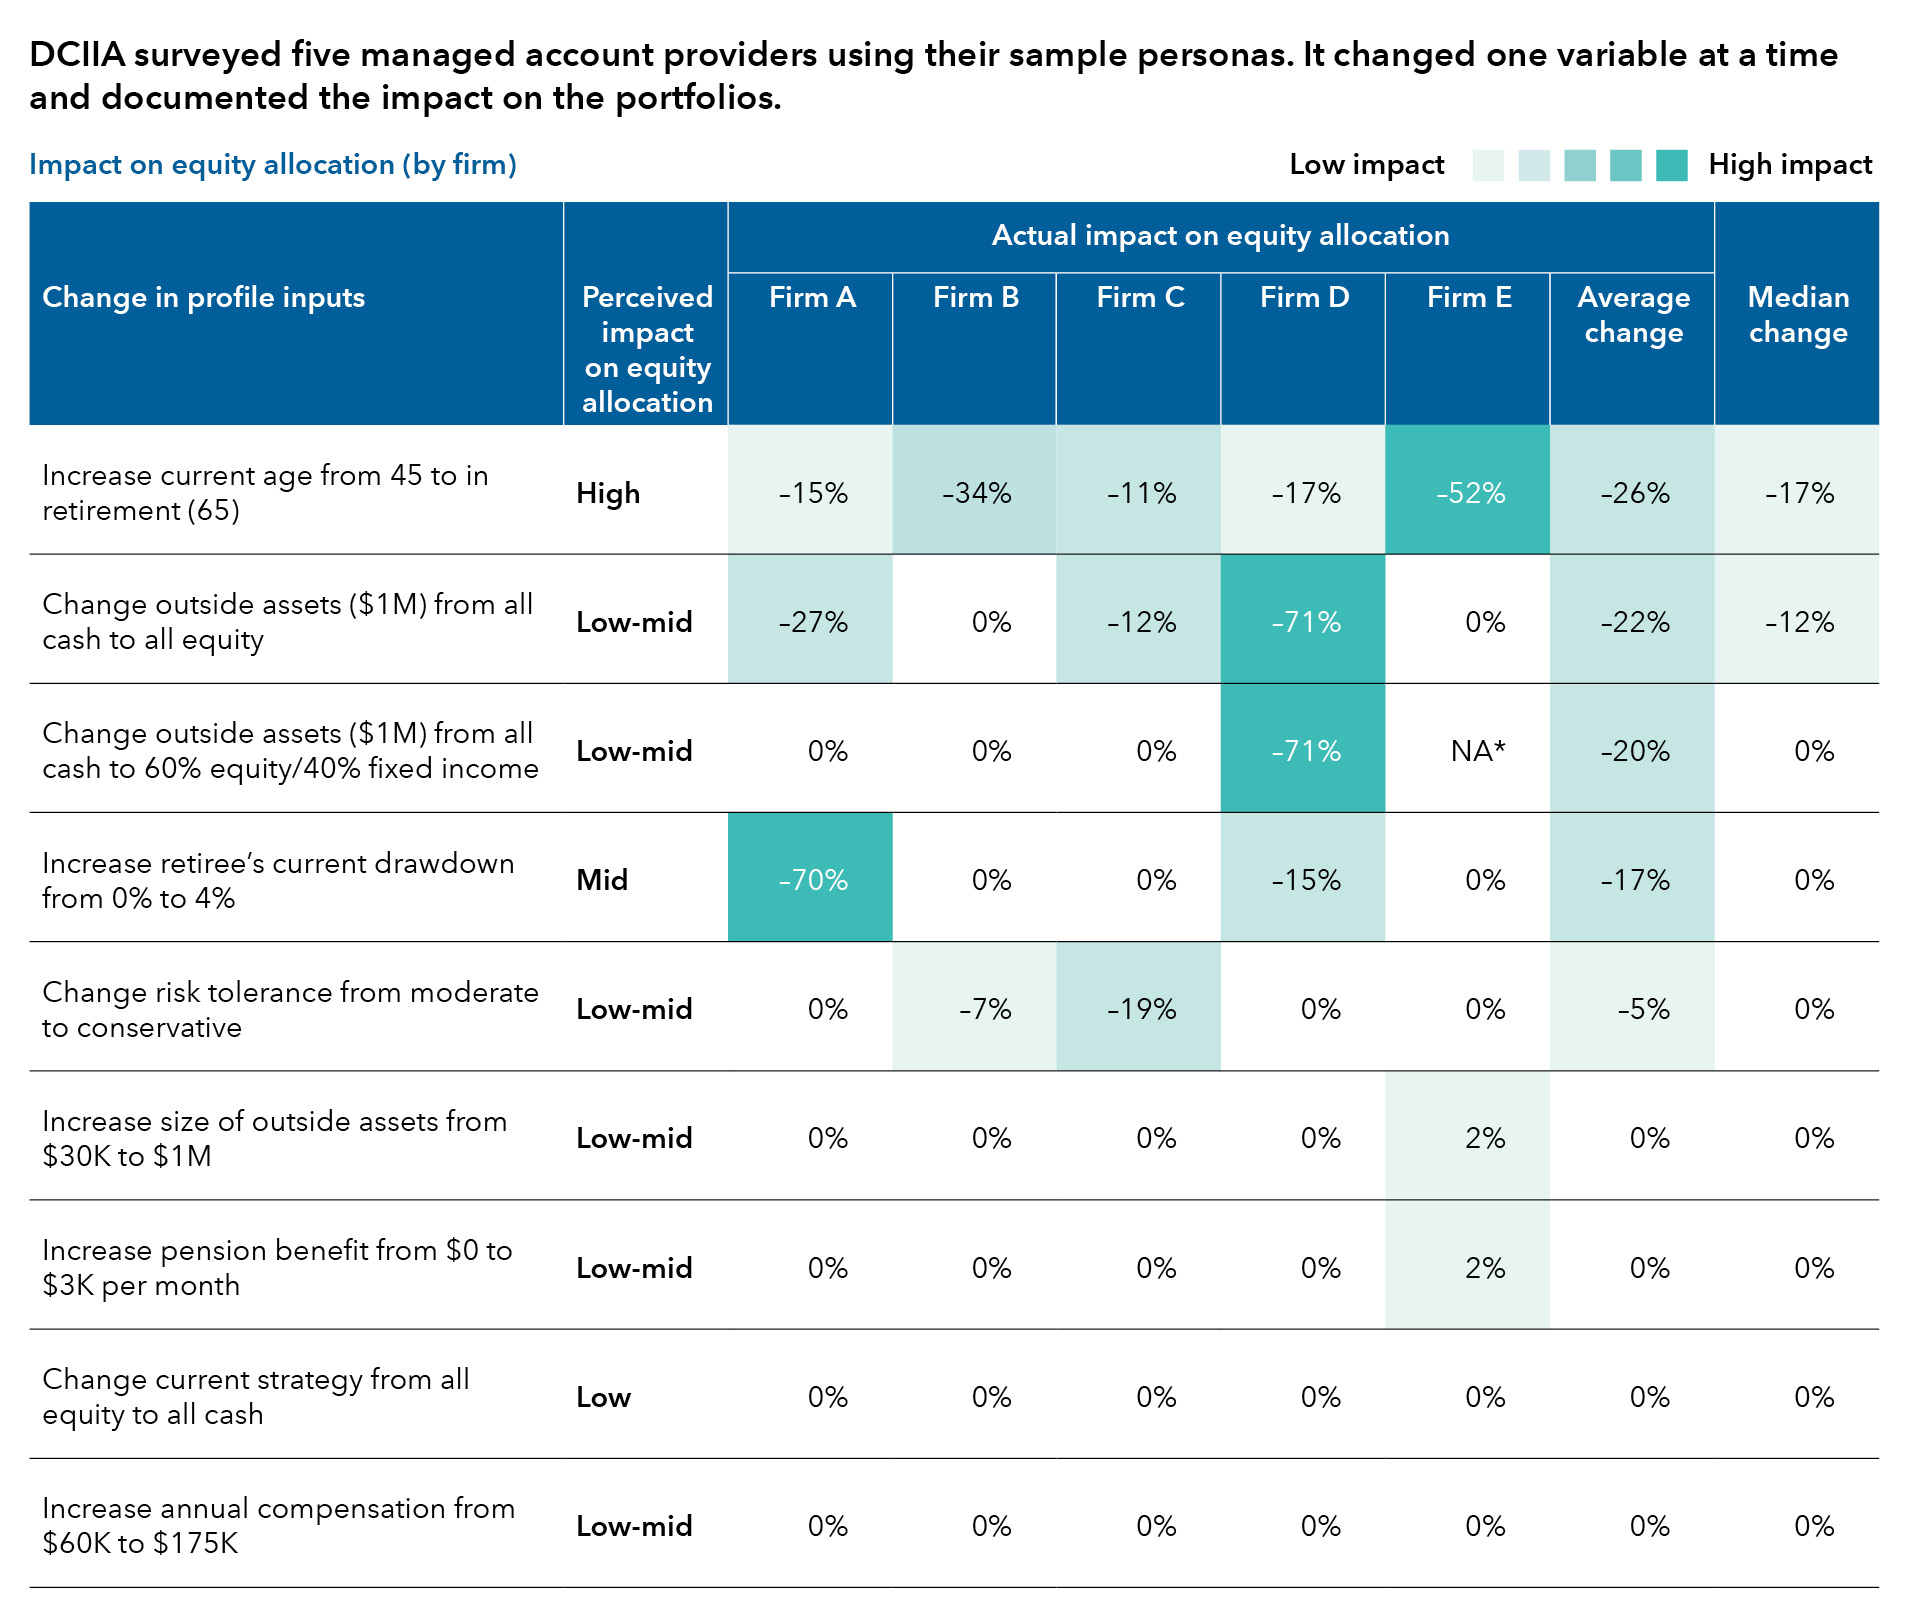 DCIIA surveyed five managed account providers using their sample personas. It changed one variable at a time and documented the impact on the portfolios. This graphic is a table depicting the expected impact on equity allocation given individual changes in profile inputs versus the actual impact on equity allocation for each firm. The following is a row-by-row summary of these inputs and impacts. Row 1 – Change in profile input: Increase current age from 45 to in retirement (65); Perceived impact on equity allocation: High; Actual impact on equity allocation: -15% (Firm A), -34% (Firm B), -11% (Firm C), -17% (Firm D), -52% (Firm E); Average change: -26%; Median change: -17%. Row 2 – Change in profile input: Change outside assets ($1 million) from all cash to all equity; Perceived impact on equity allocation: Low-mid; Actual impact on equity allocation: -27% (Firm A), 0% (Firm B), -12% (Firm C), -71% (Firm D), 0% (Firm E); Average change: -22%; Median change: -12%. Row 3 – Change in profile input: Change outside assets ($1 million) from all cash to 60% equity/40% fixed income; Perceived impact on equity allocation: Low-mid; Actual impact on equity allocation: 0% (Firm A), 0% (Firm B), 0% (Firm C), -71% (Firm D), NA (Firm E); Average change: -20%; Median change: 0%. Row 4 – Change in profile input: Increase retiree's current drawdown from 0% to 4%; Perceived impact on equity allocation: Mid; Actual impact on equity allocation: -70% (Firm A), 0% (Firm B), 0% (Firm C), -15% (Firm D), 0% (Firm E); Average change: -17%; Median change: 0%. Row 5 – Change in profile input: Change risk tolerance from moderate to conservative; Perceived impact on equity allocation: Low-mid; Actual impact on equity allocation: 0% (Firm A), -7% (Firm B), -19% (Firm C), 0% (Firm D), 0% (Firm E); Average change: -5%; Median change: 0%. Row 6 – Change in profile input: Increase size of outside assets from $30,000 to $1 million; Perceived impact on equity allocation: Low-mid; Actual impact on equity allocation: 0% (Firm A), 0% (Firm B), 0% (Firm C), 0% (Firm D), 2% (Firm E); Average change: 0%; Median change: 0%. Row 7 – Change in profile input: Increase pension benefit from $0 to $3,000/month; Perceived impact on equity allocation: Low-mid; Actual impact on equity allocation: 0% (Firm A), 0% (Firm B), 0% (Firm C), 0% (Firm D), 2% (Firm E); Average change: 0%; Median change: 0%. Row 8 – Change in profile input: Change current strategy from all equity to all cash; Perceived impact on equity allocation: Low; Actual impact on equity allocation: 0% (Firm A), 0% (Firm B), 0% (Firm C), 0% (Firm D), 0% (Firm E); Average change: 0%; Median change: 0%. Row 9 – Change in profile input: Increase annual compensation from $60,000 to $175,000; Perceived impact on equity allocation: Low-mid; Actual impact on equity allocation: 0% (Firm A), 0% (Firm B), 0% (Firm C), 0% (Firm D), 0% (Firm E); Average change: 0%; Median change: 0%.